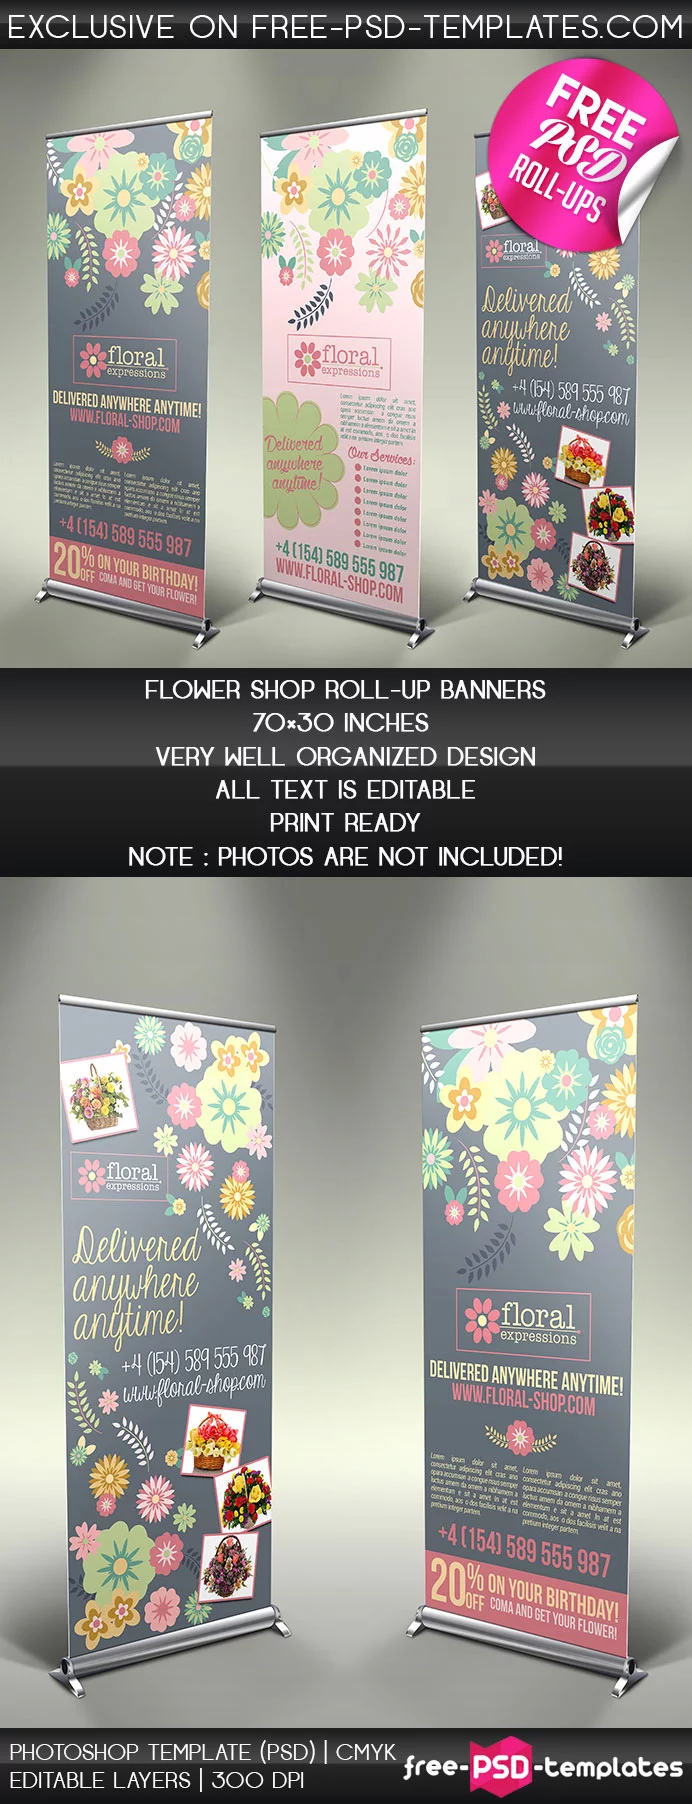 Preview_Flower_Shop_Banners_Template